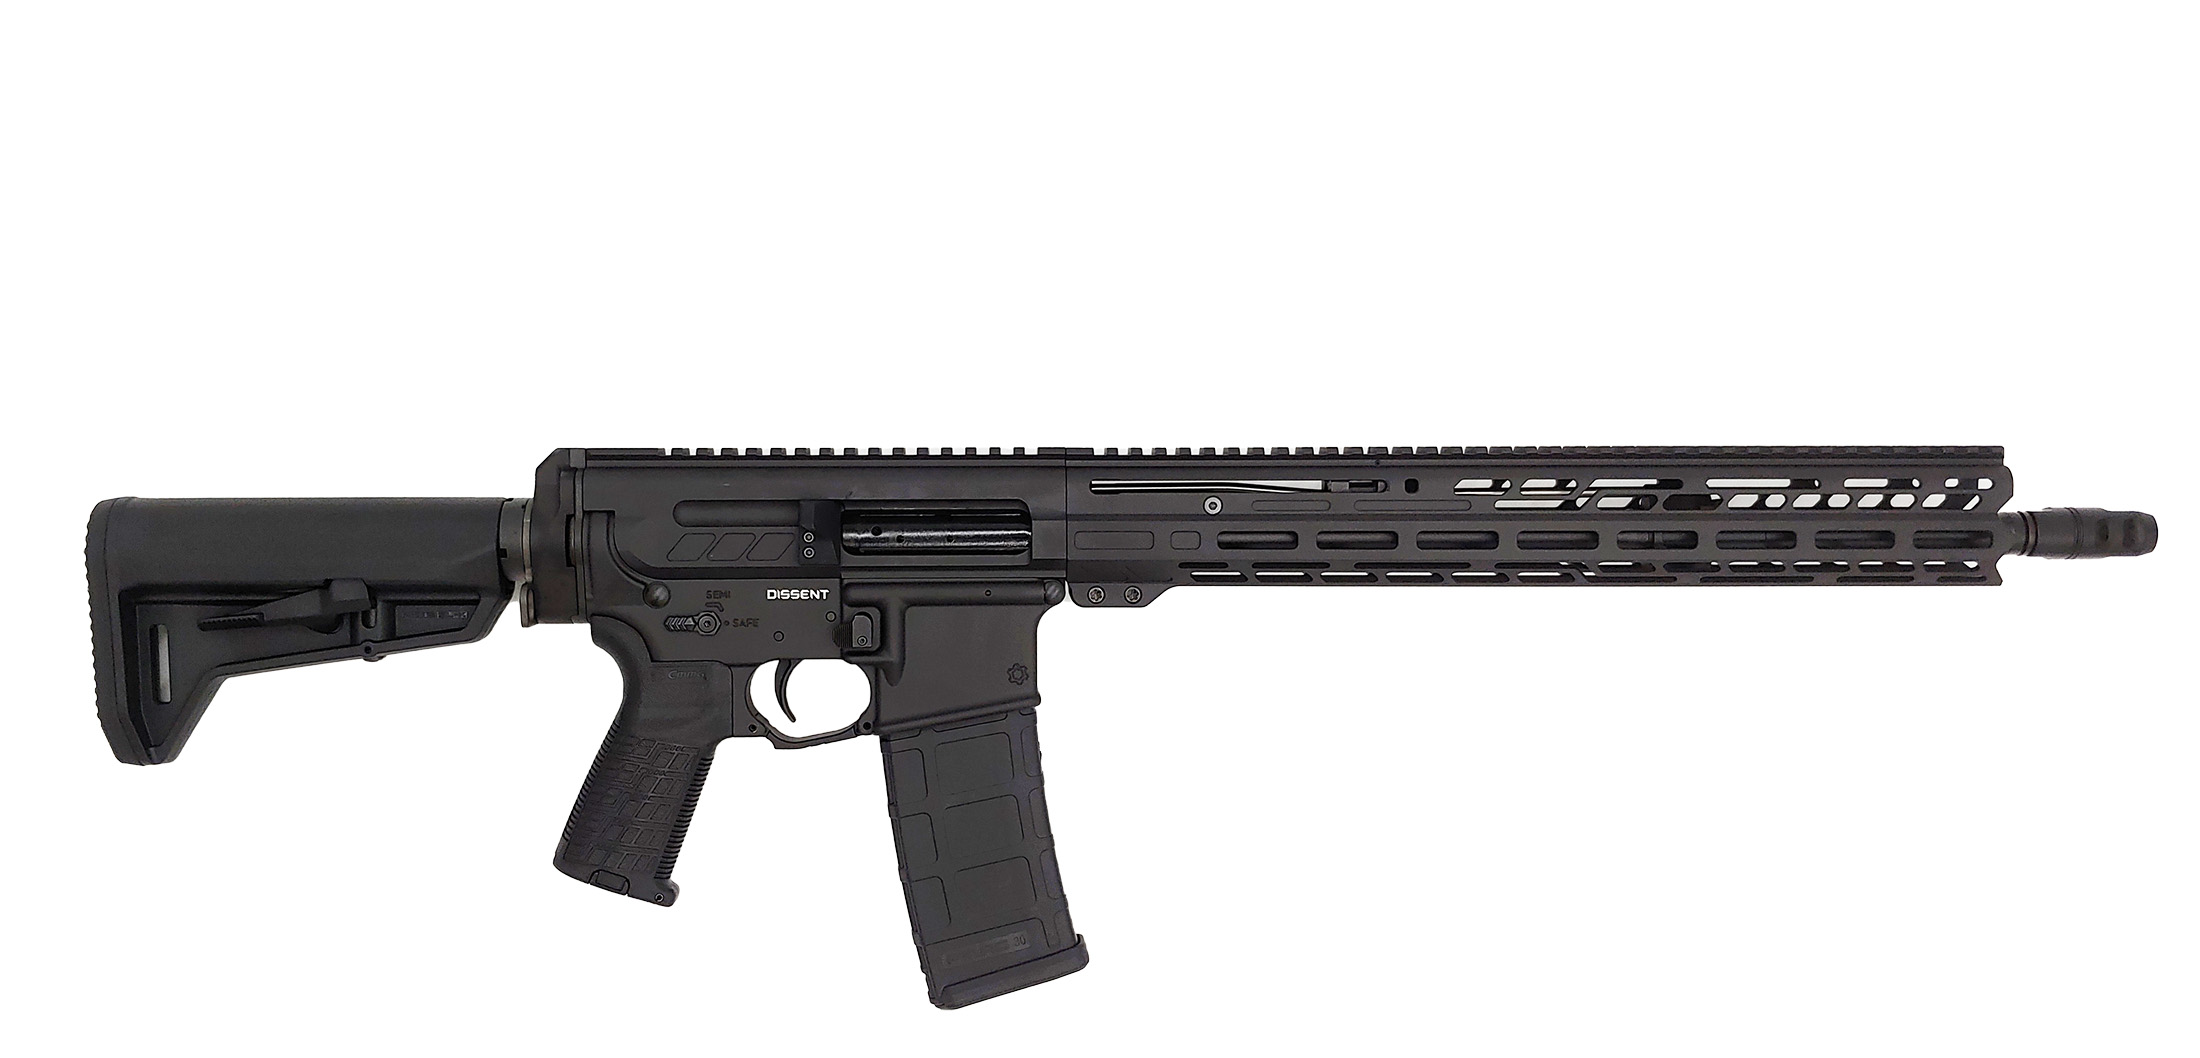 CMMG Dissent Mk4, 5.56mm, 16.1" Barrel, 2- 30rd PMAGs, Collapsible Stock, B-img-0